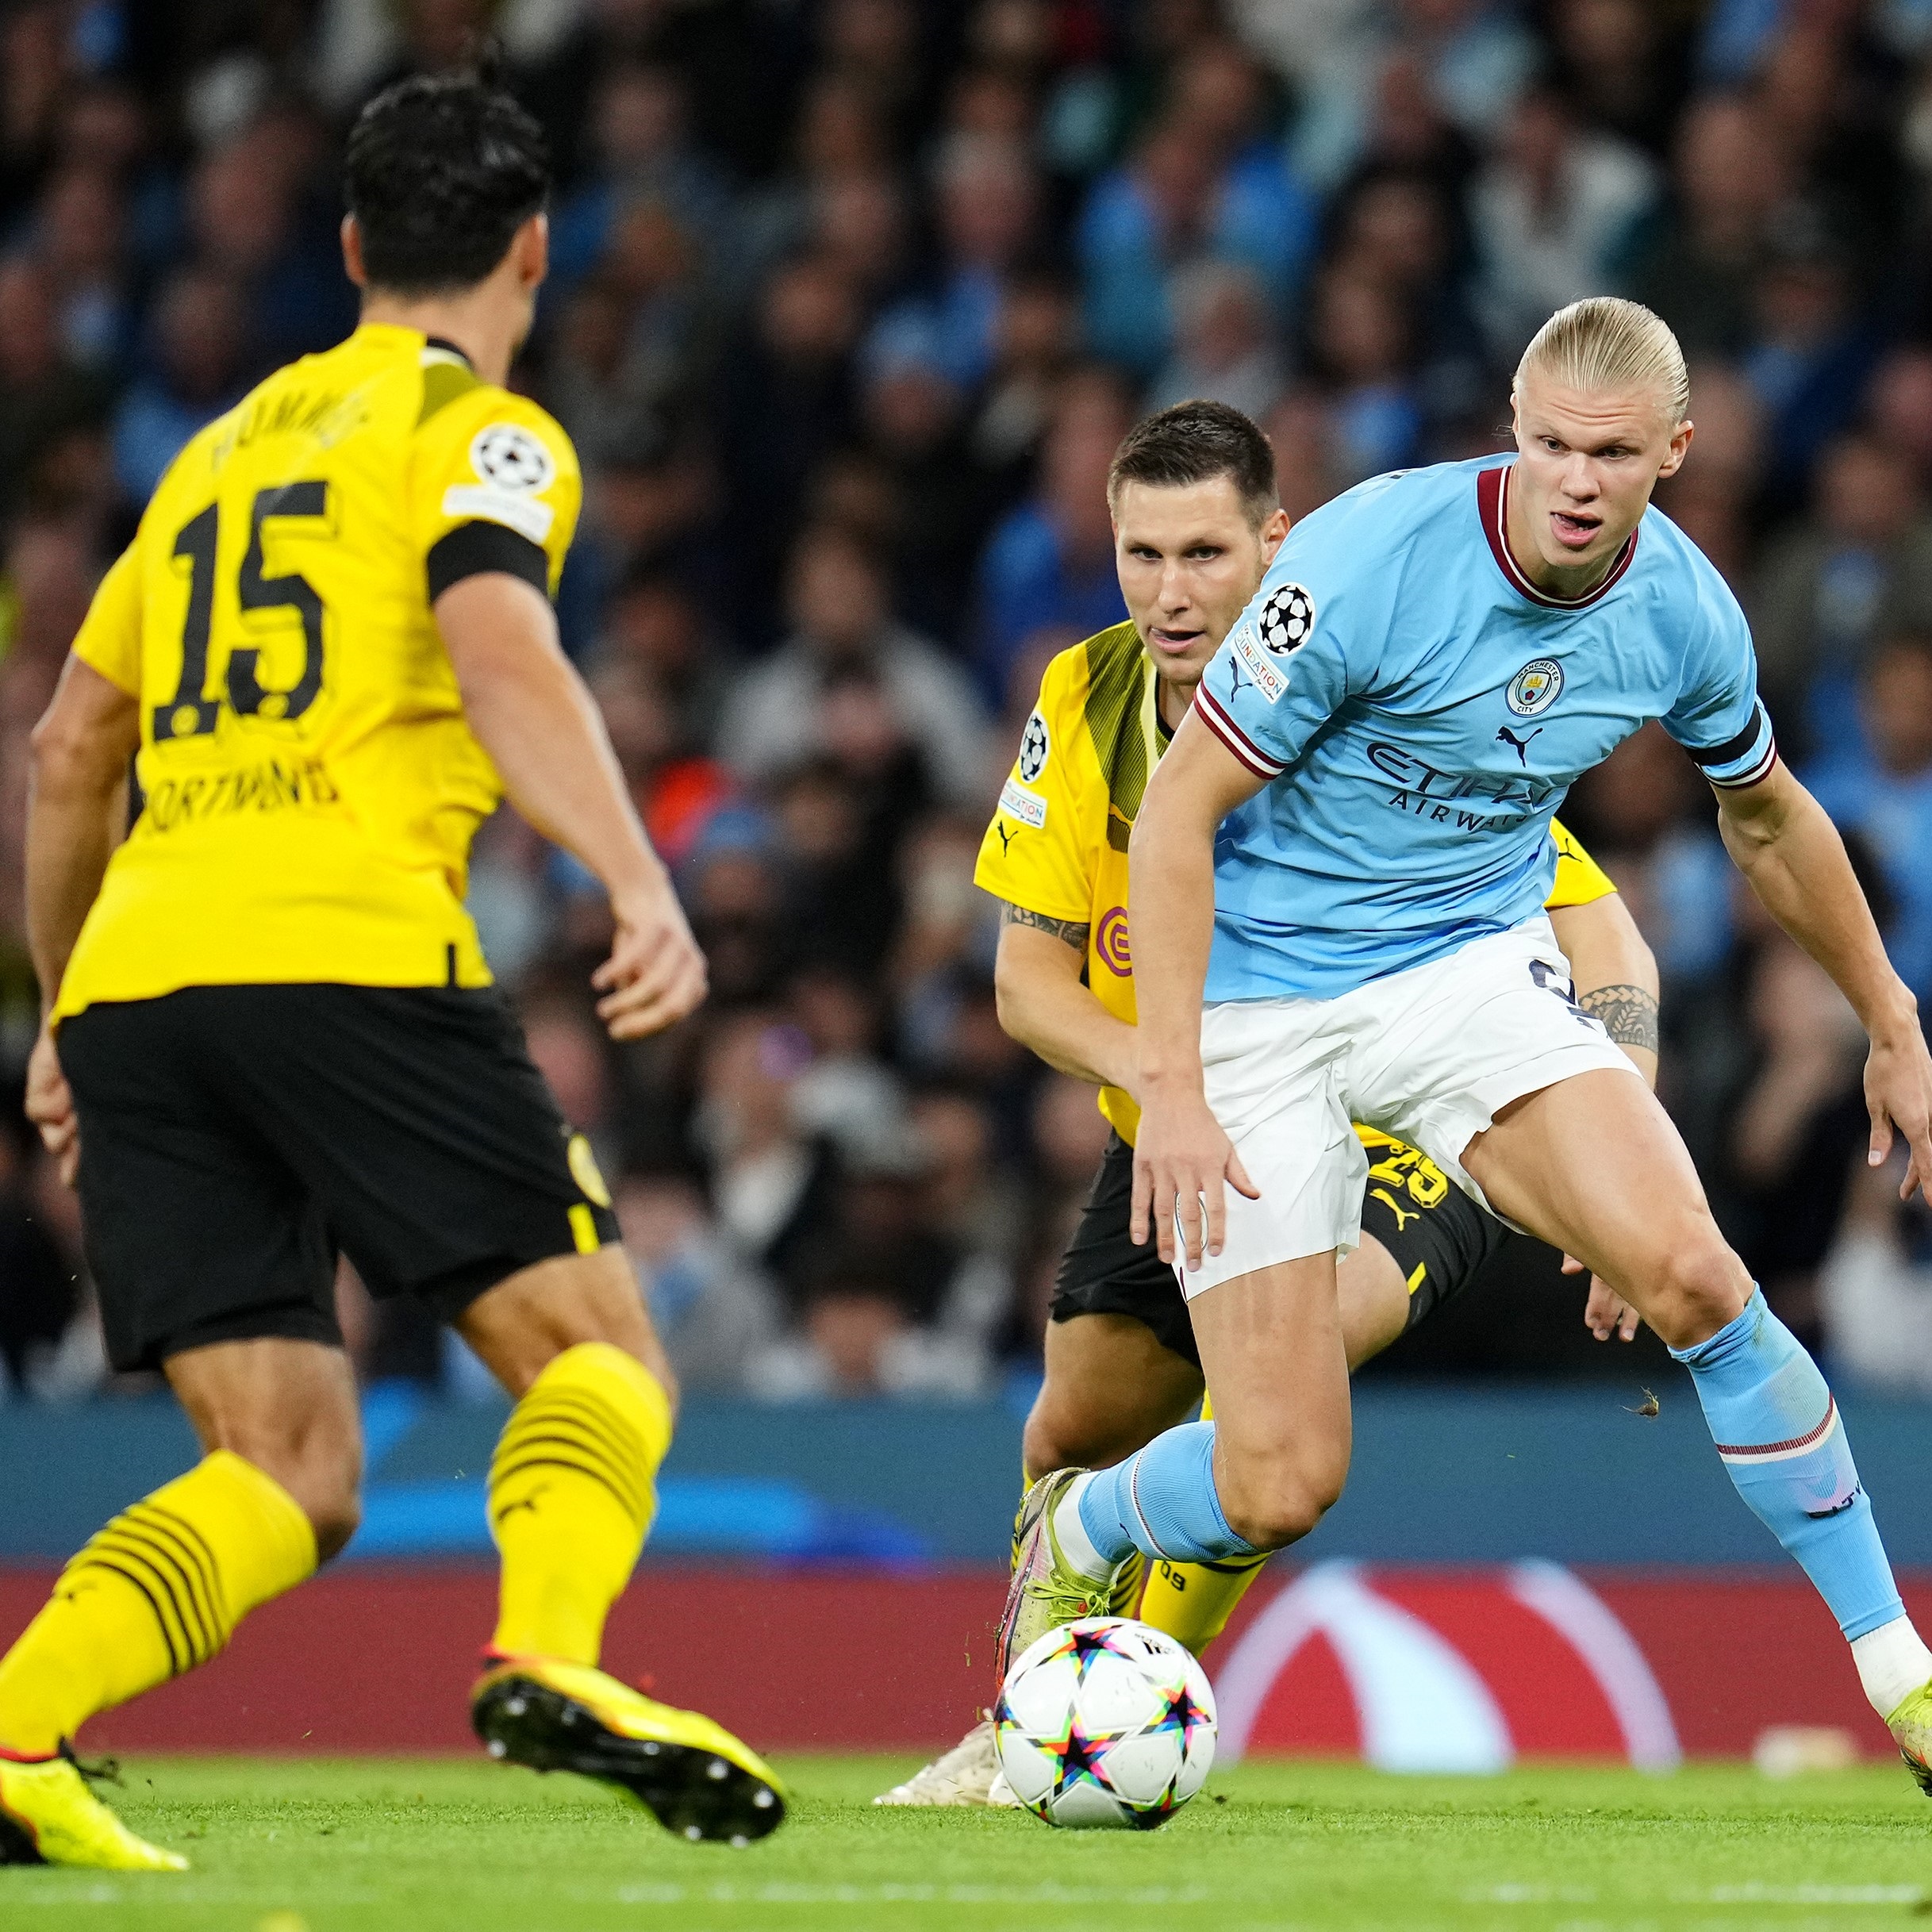 The result of the match between Manchester City and Borussia Dortmund in the Champions League